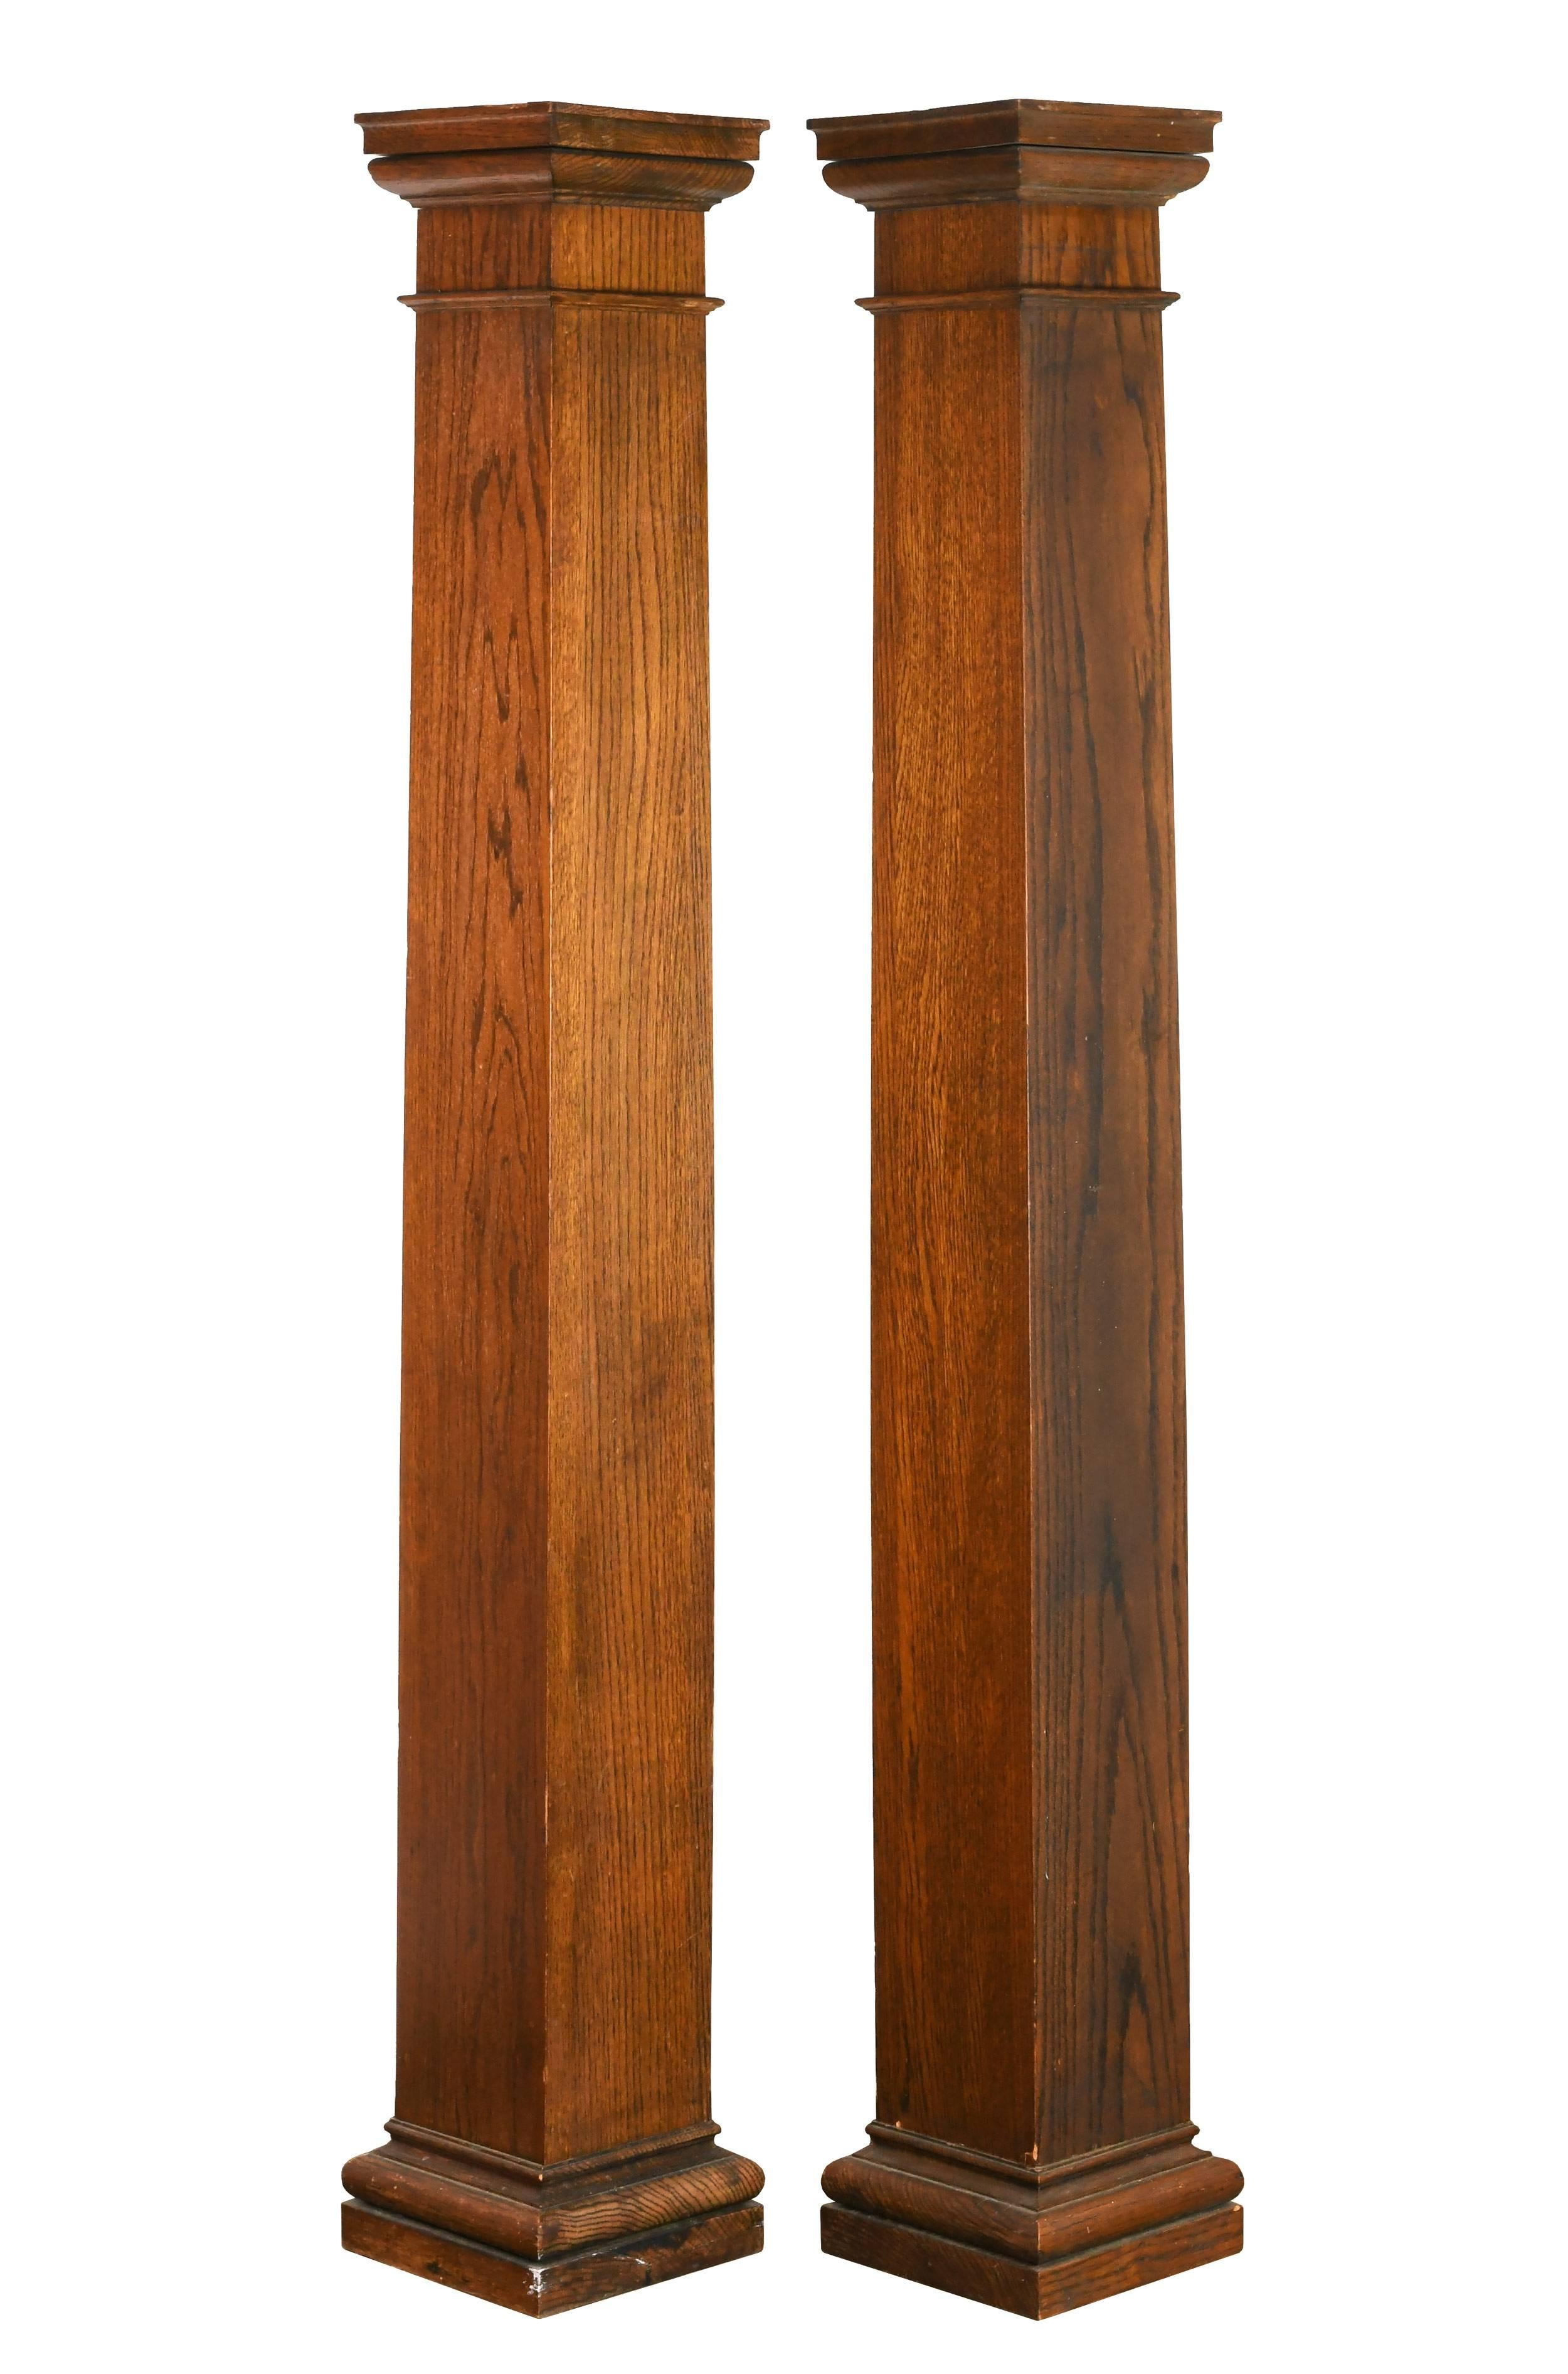 Add architectural interest to your home with these square oak columns. They are stained a warm, rich tone and feature simple and clean contours.

Please note that each column is sold separately.


